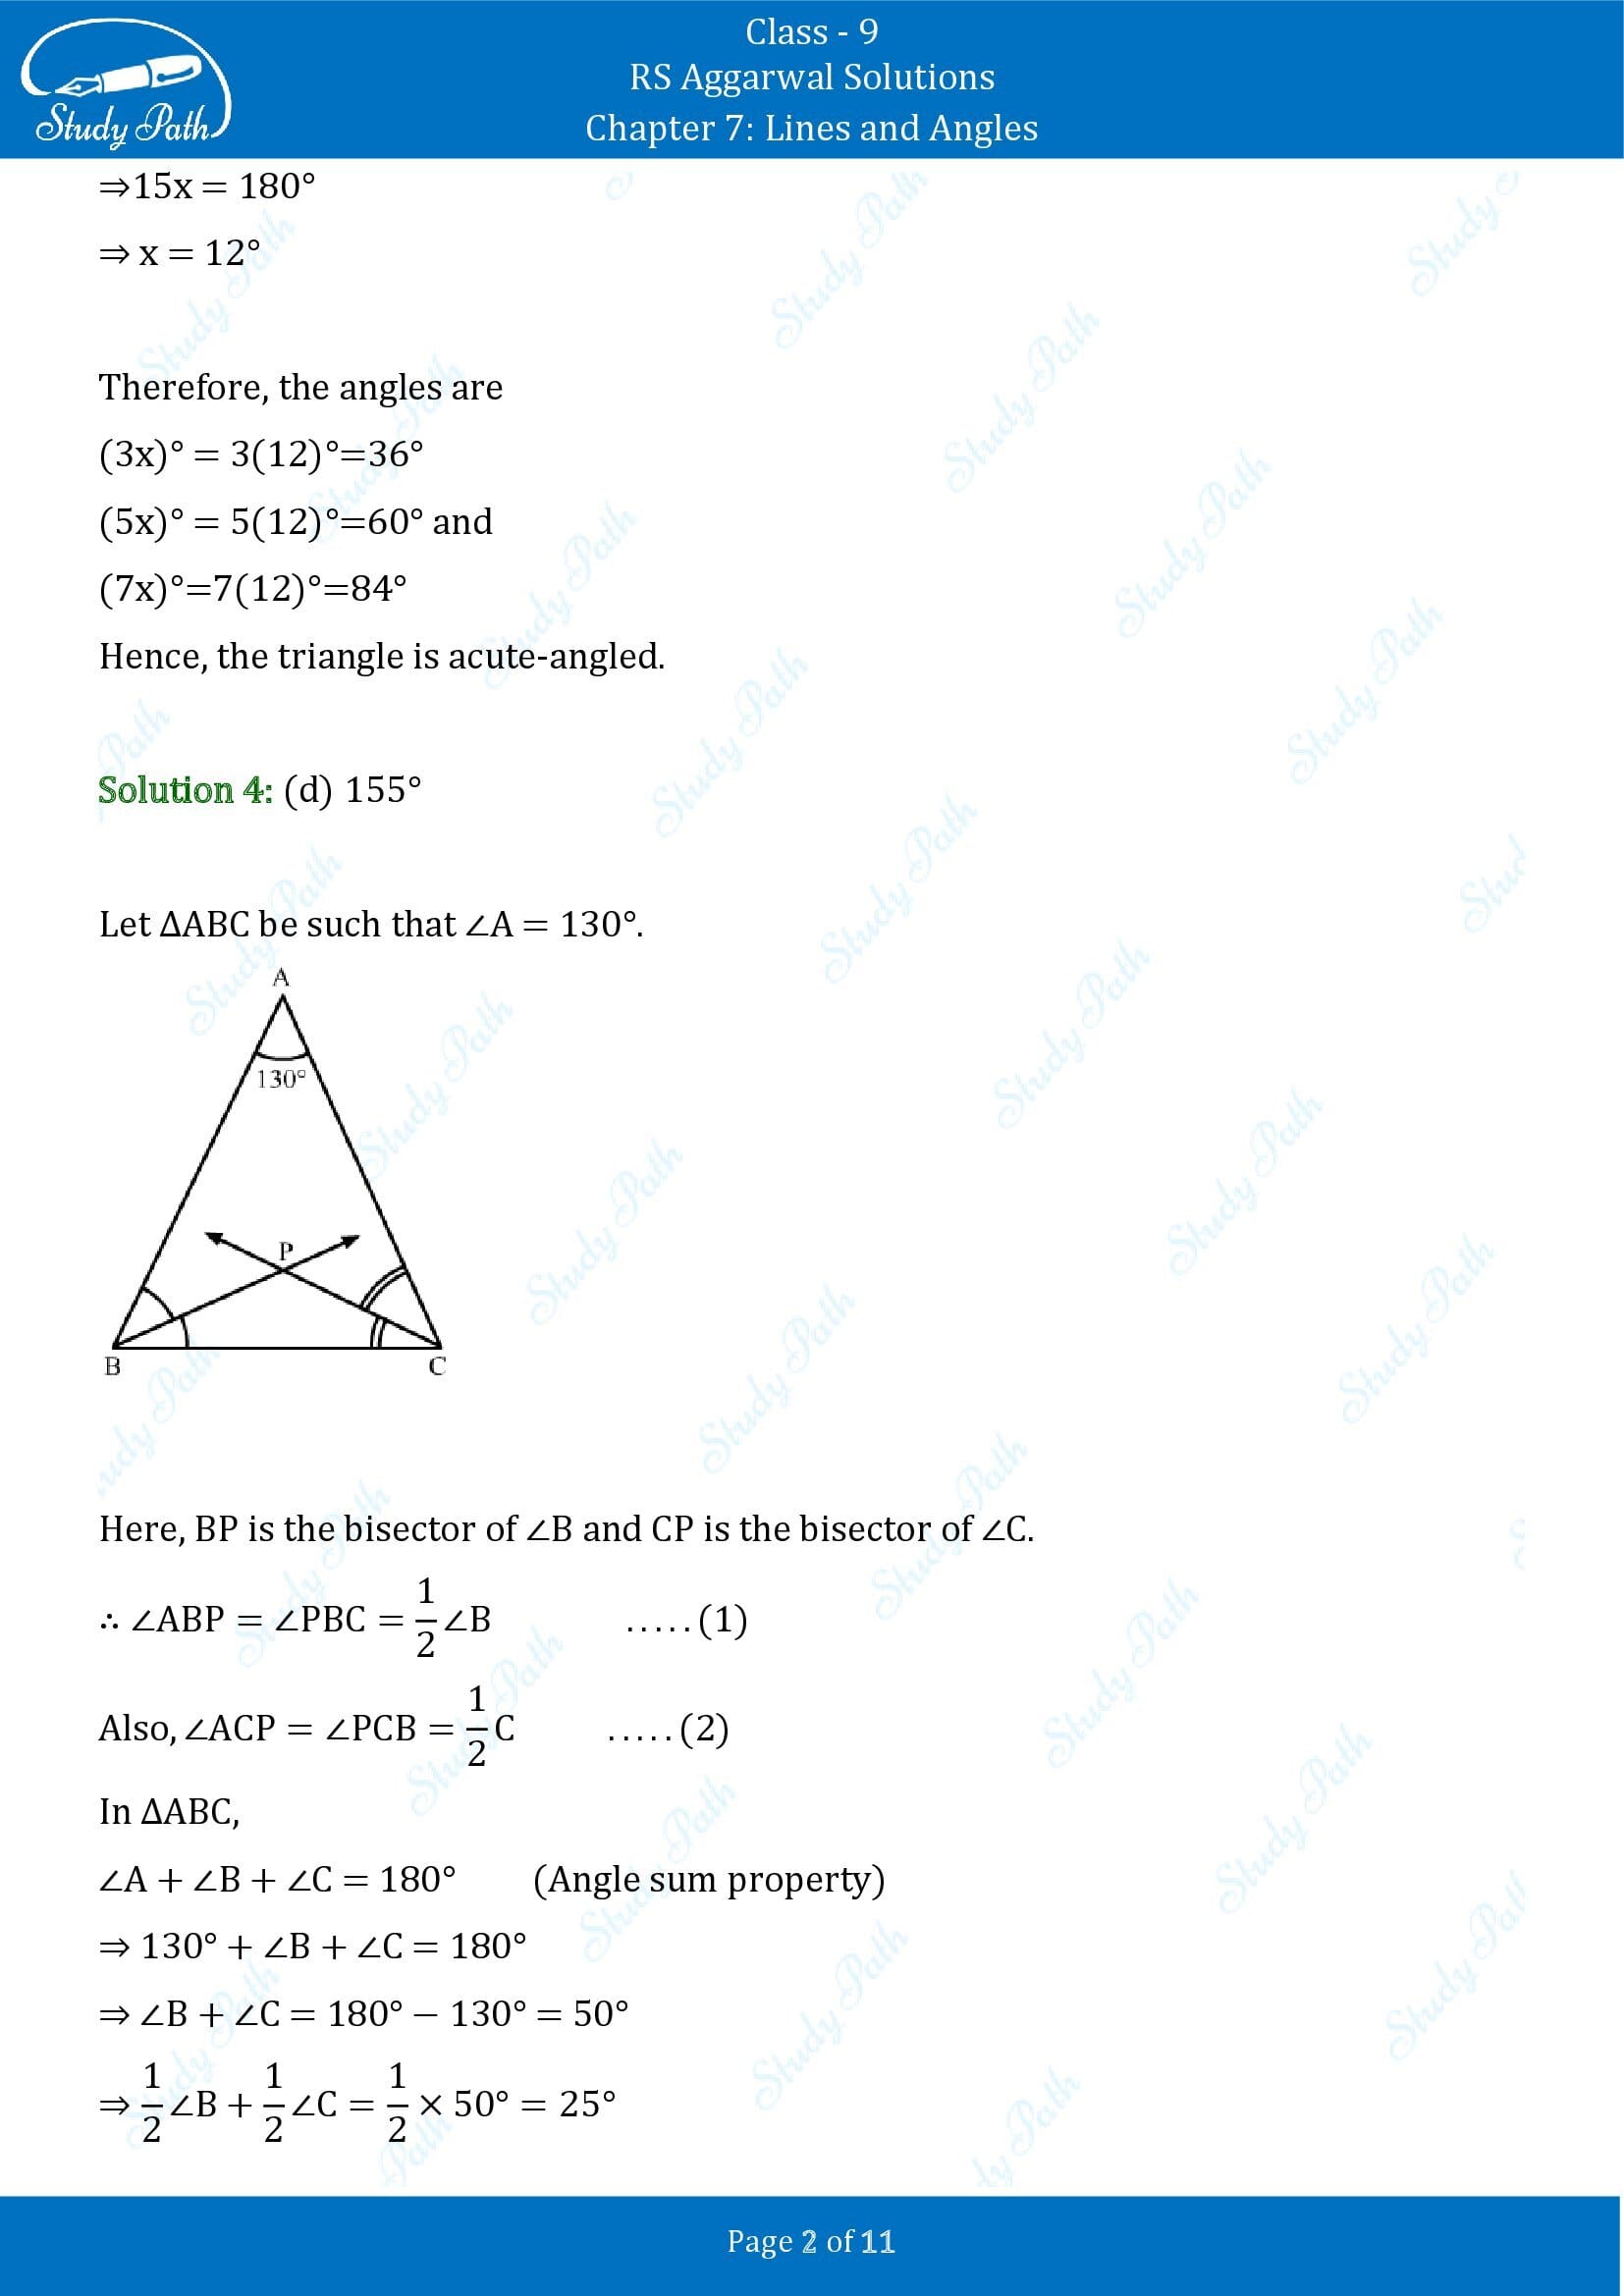 RS Aggarwal Solutions Class 9 Chapter 7 Lines and Angles Multiple Choice Questions MCQs 00002